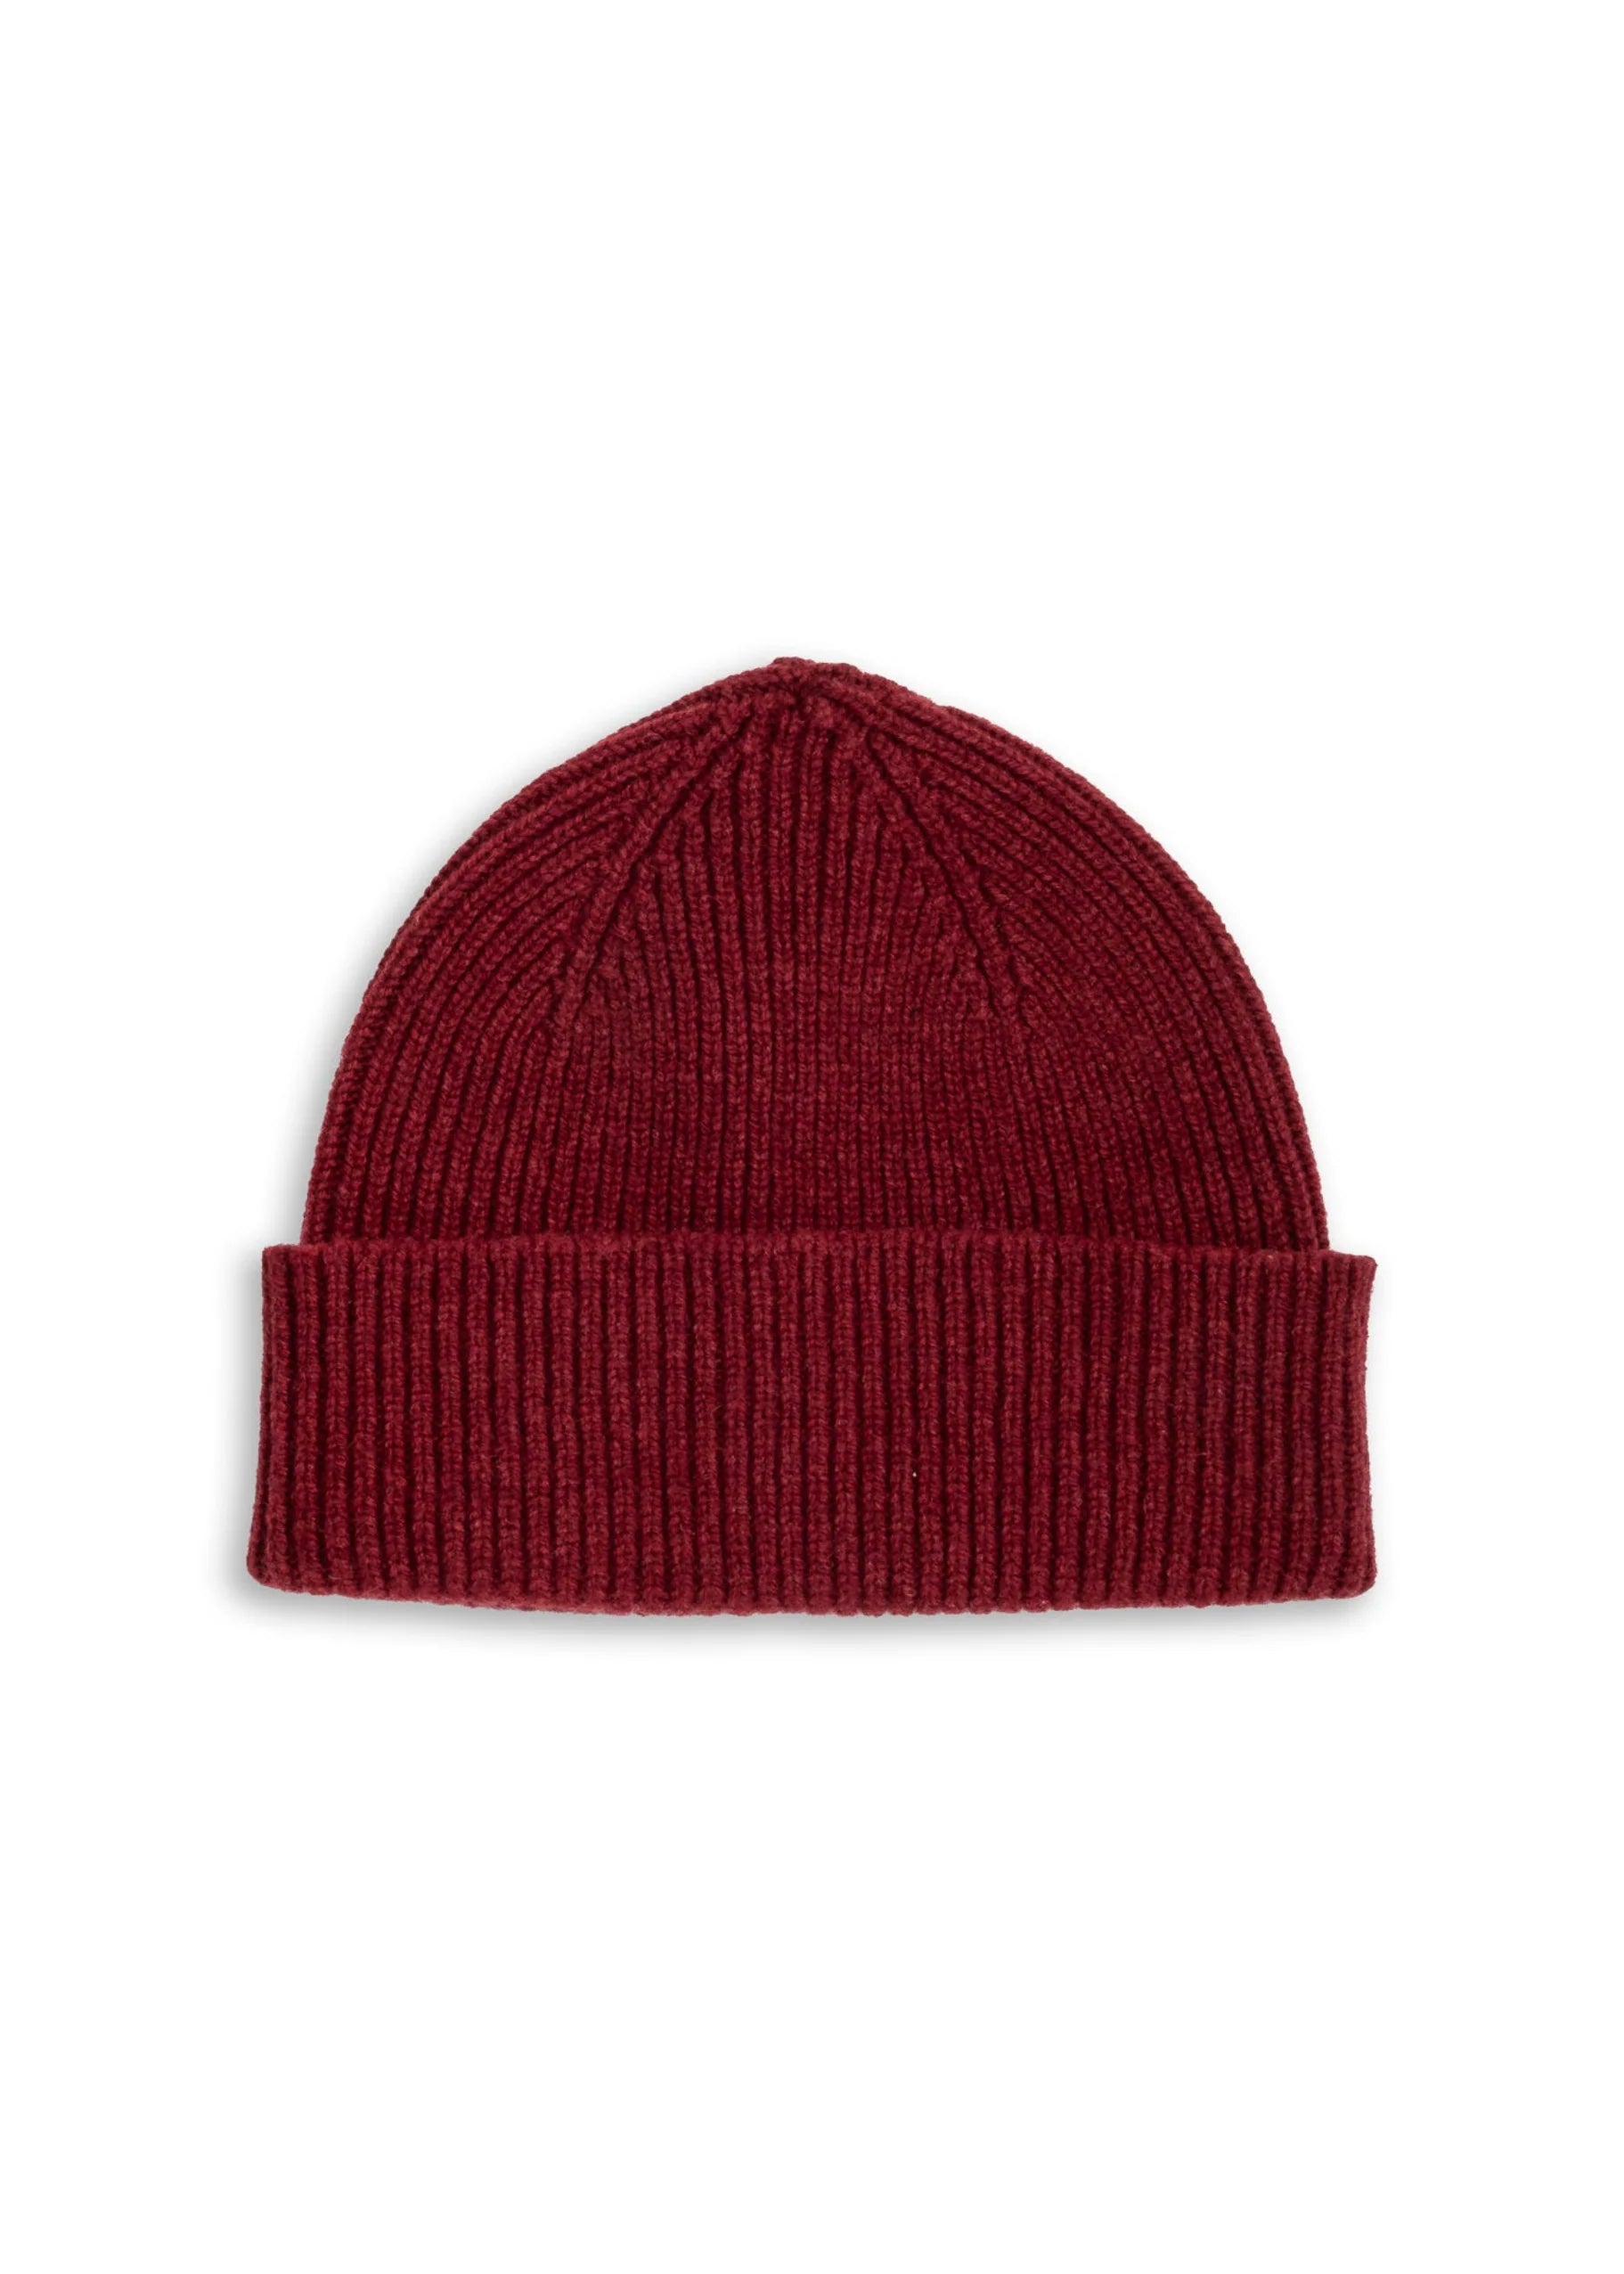 Donegal Virgin Wool Beanie - Cherry Red